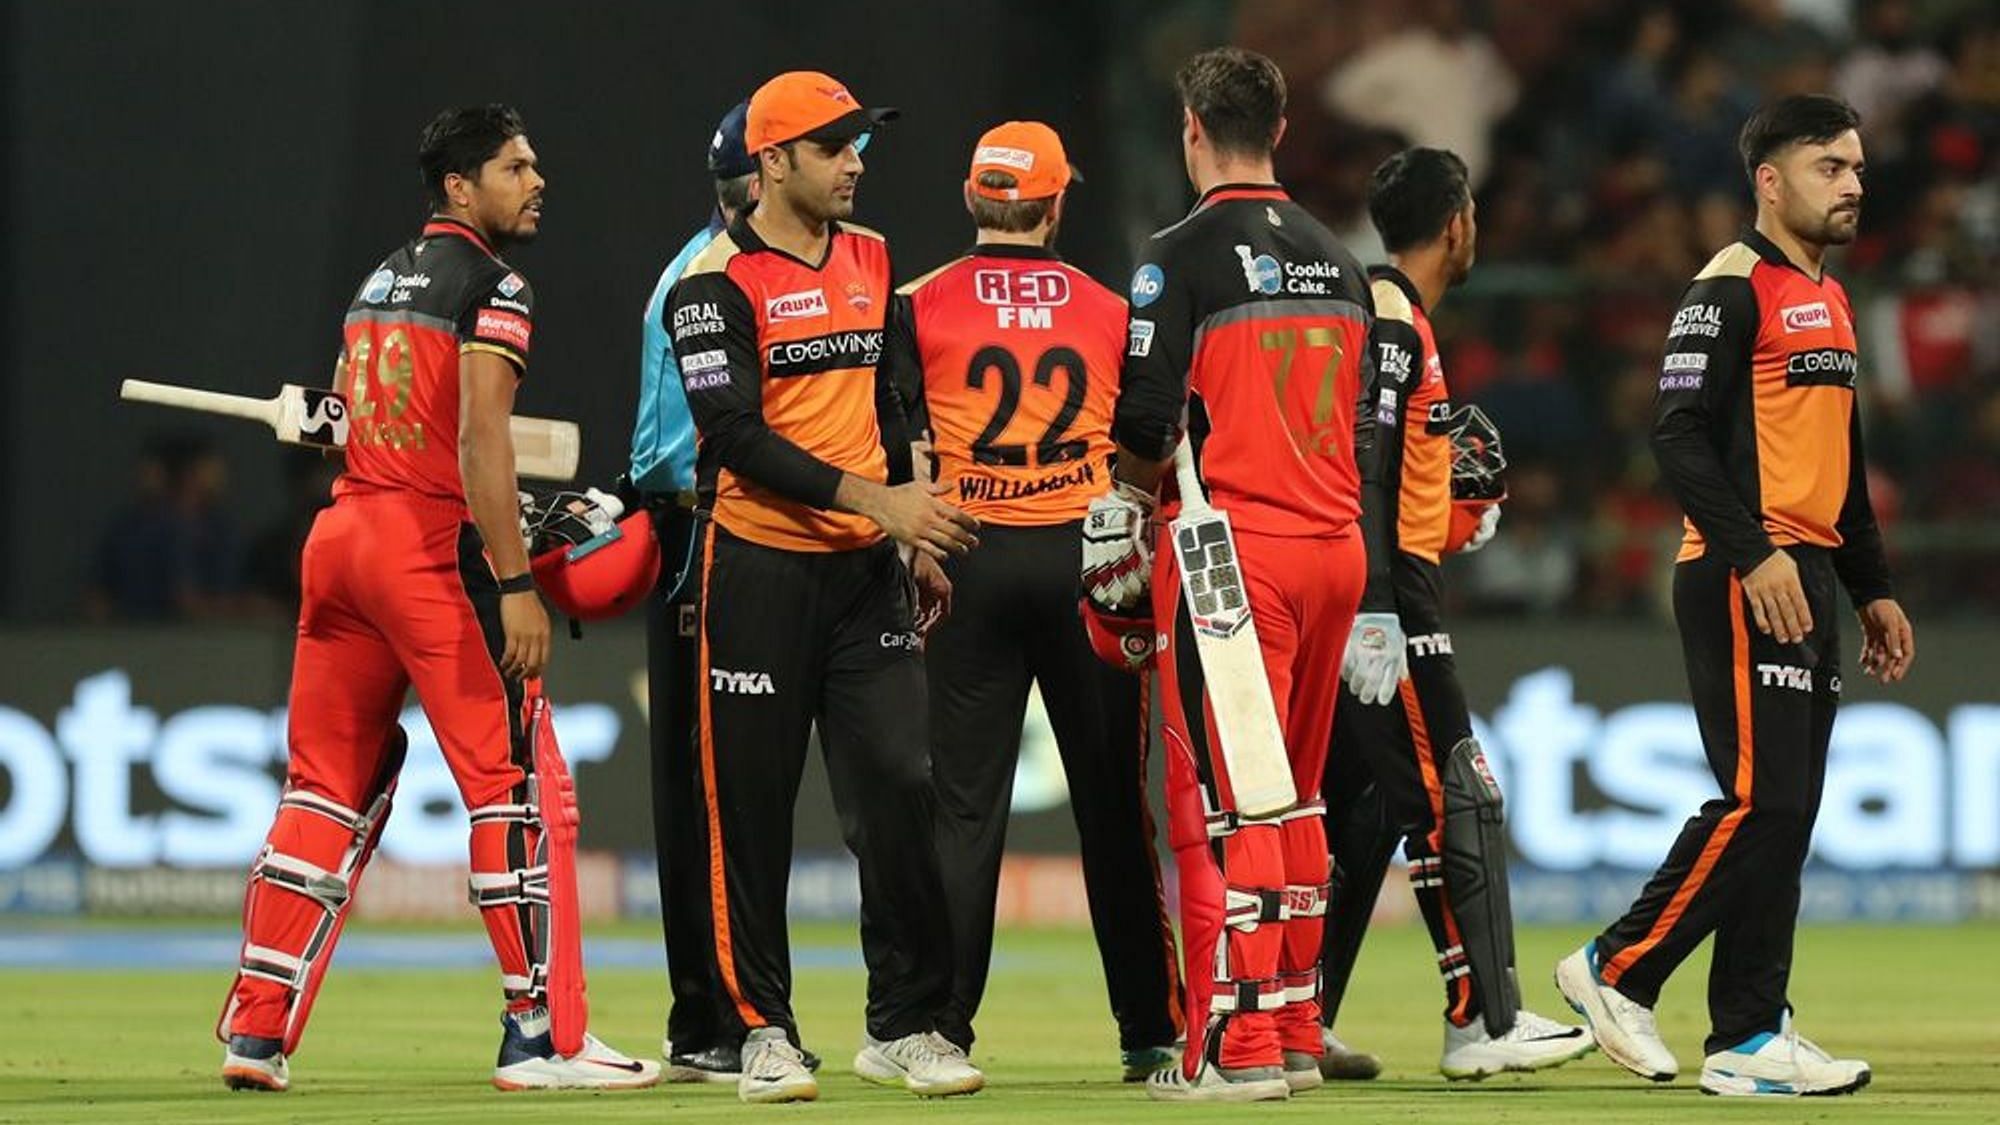 Sunrisers Hyderabad will face Royal Challengers Bangalore in Match 3 of the Indian Premier League on Monday.